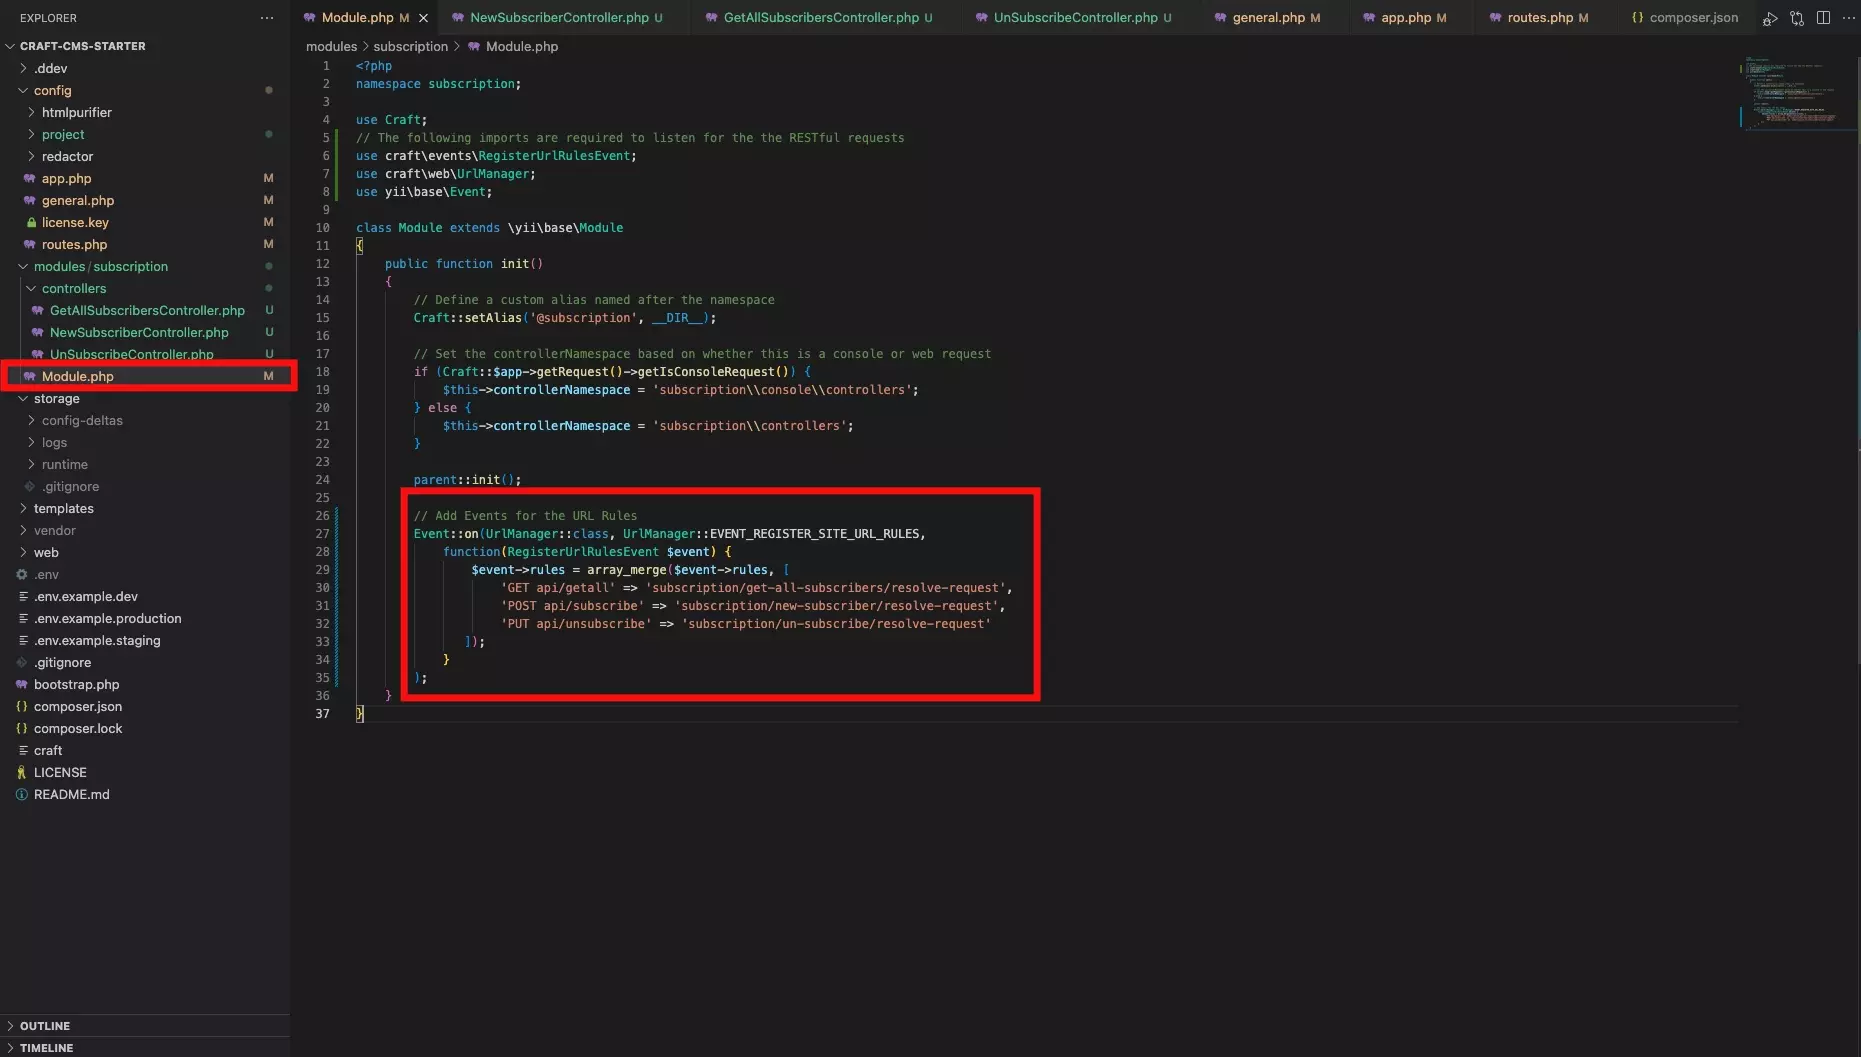 A screenshot of VSCode with the updated code for the Module.php with the URL Rules added to make sure it links up.